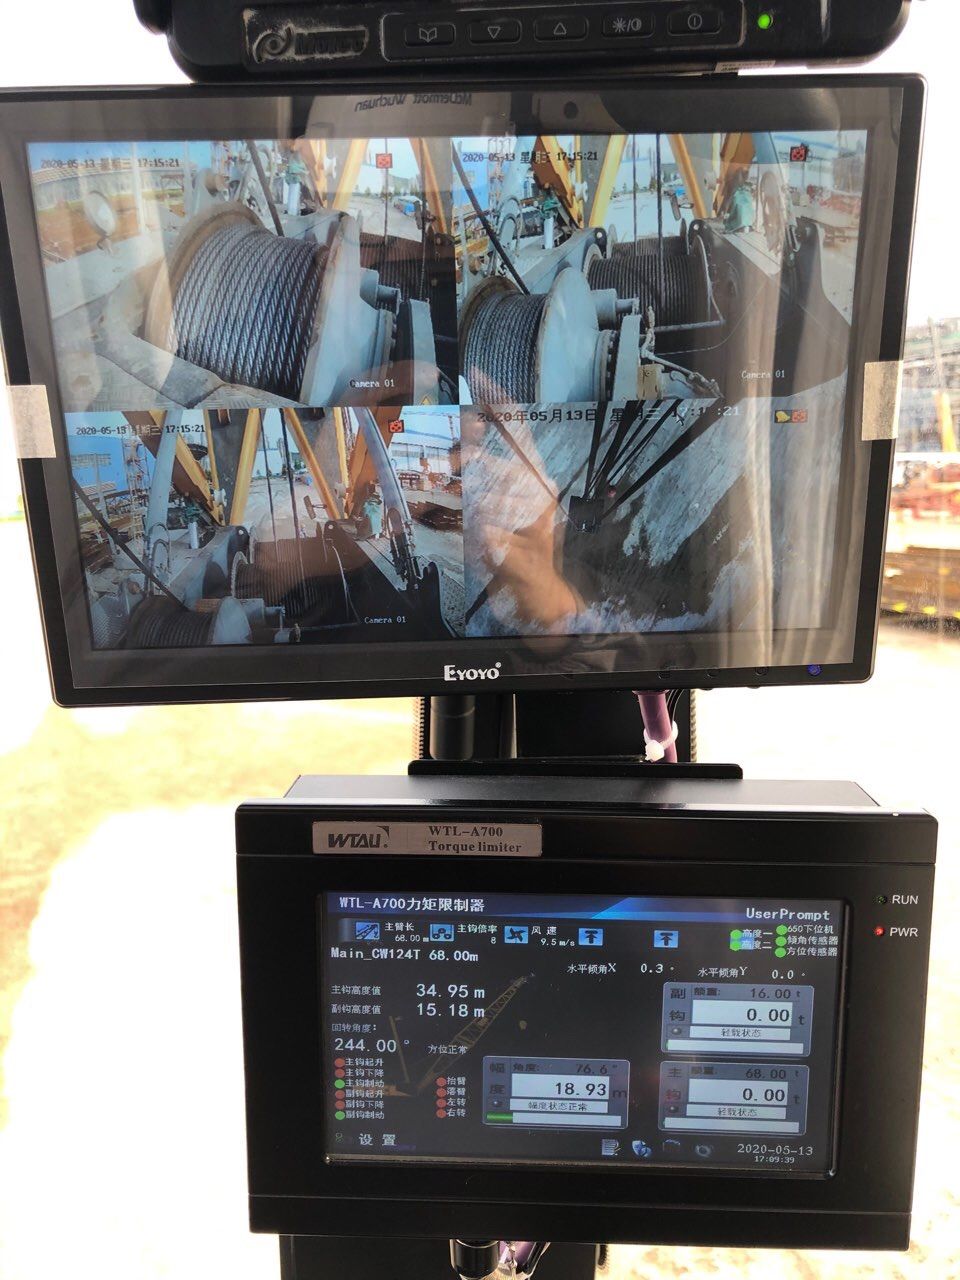 Operation legend of control center of safety monitoring system of micro special crane